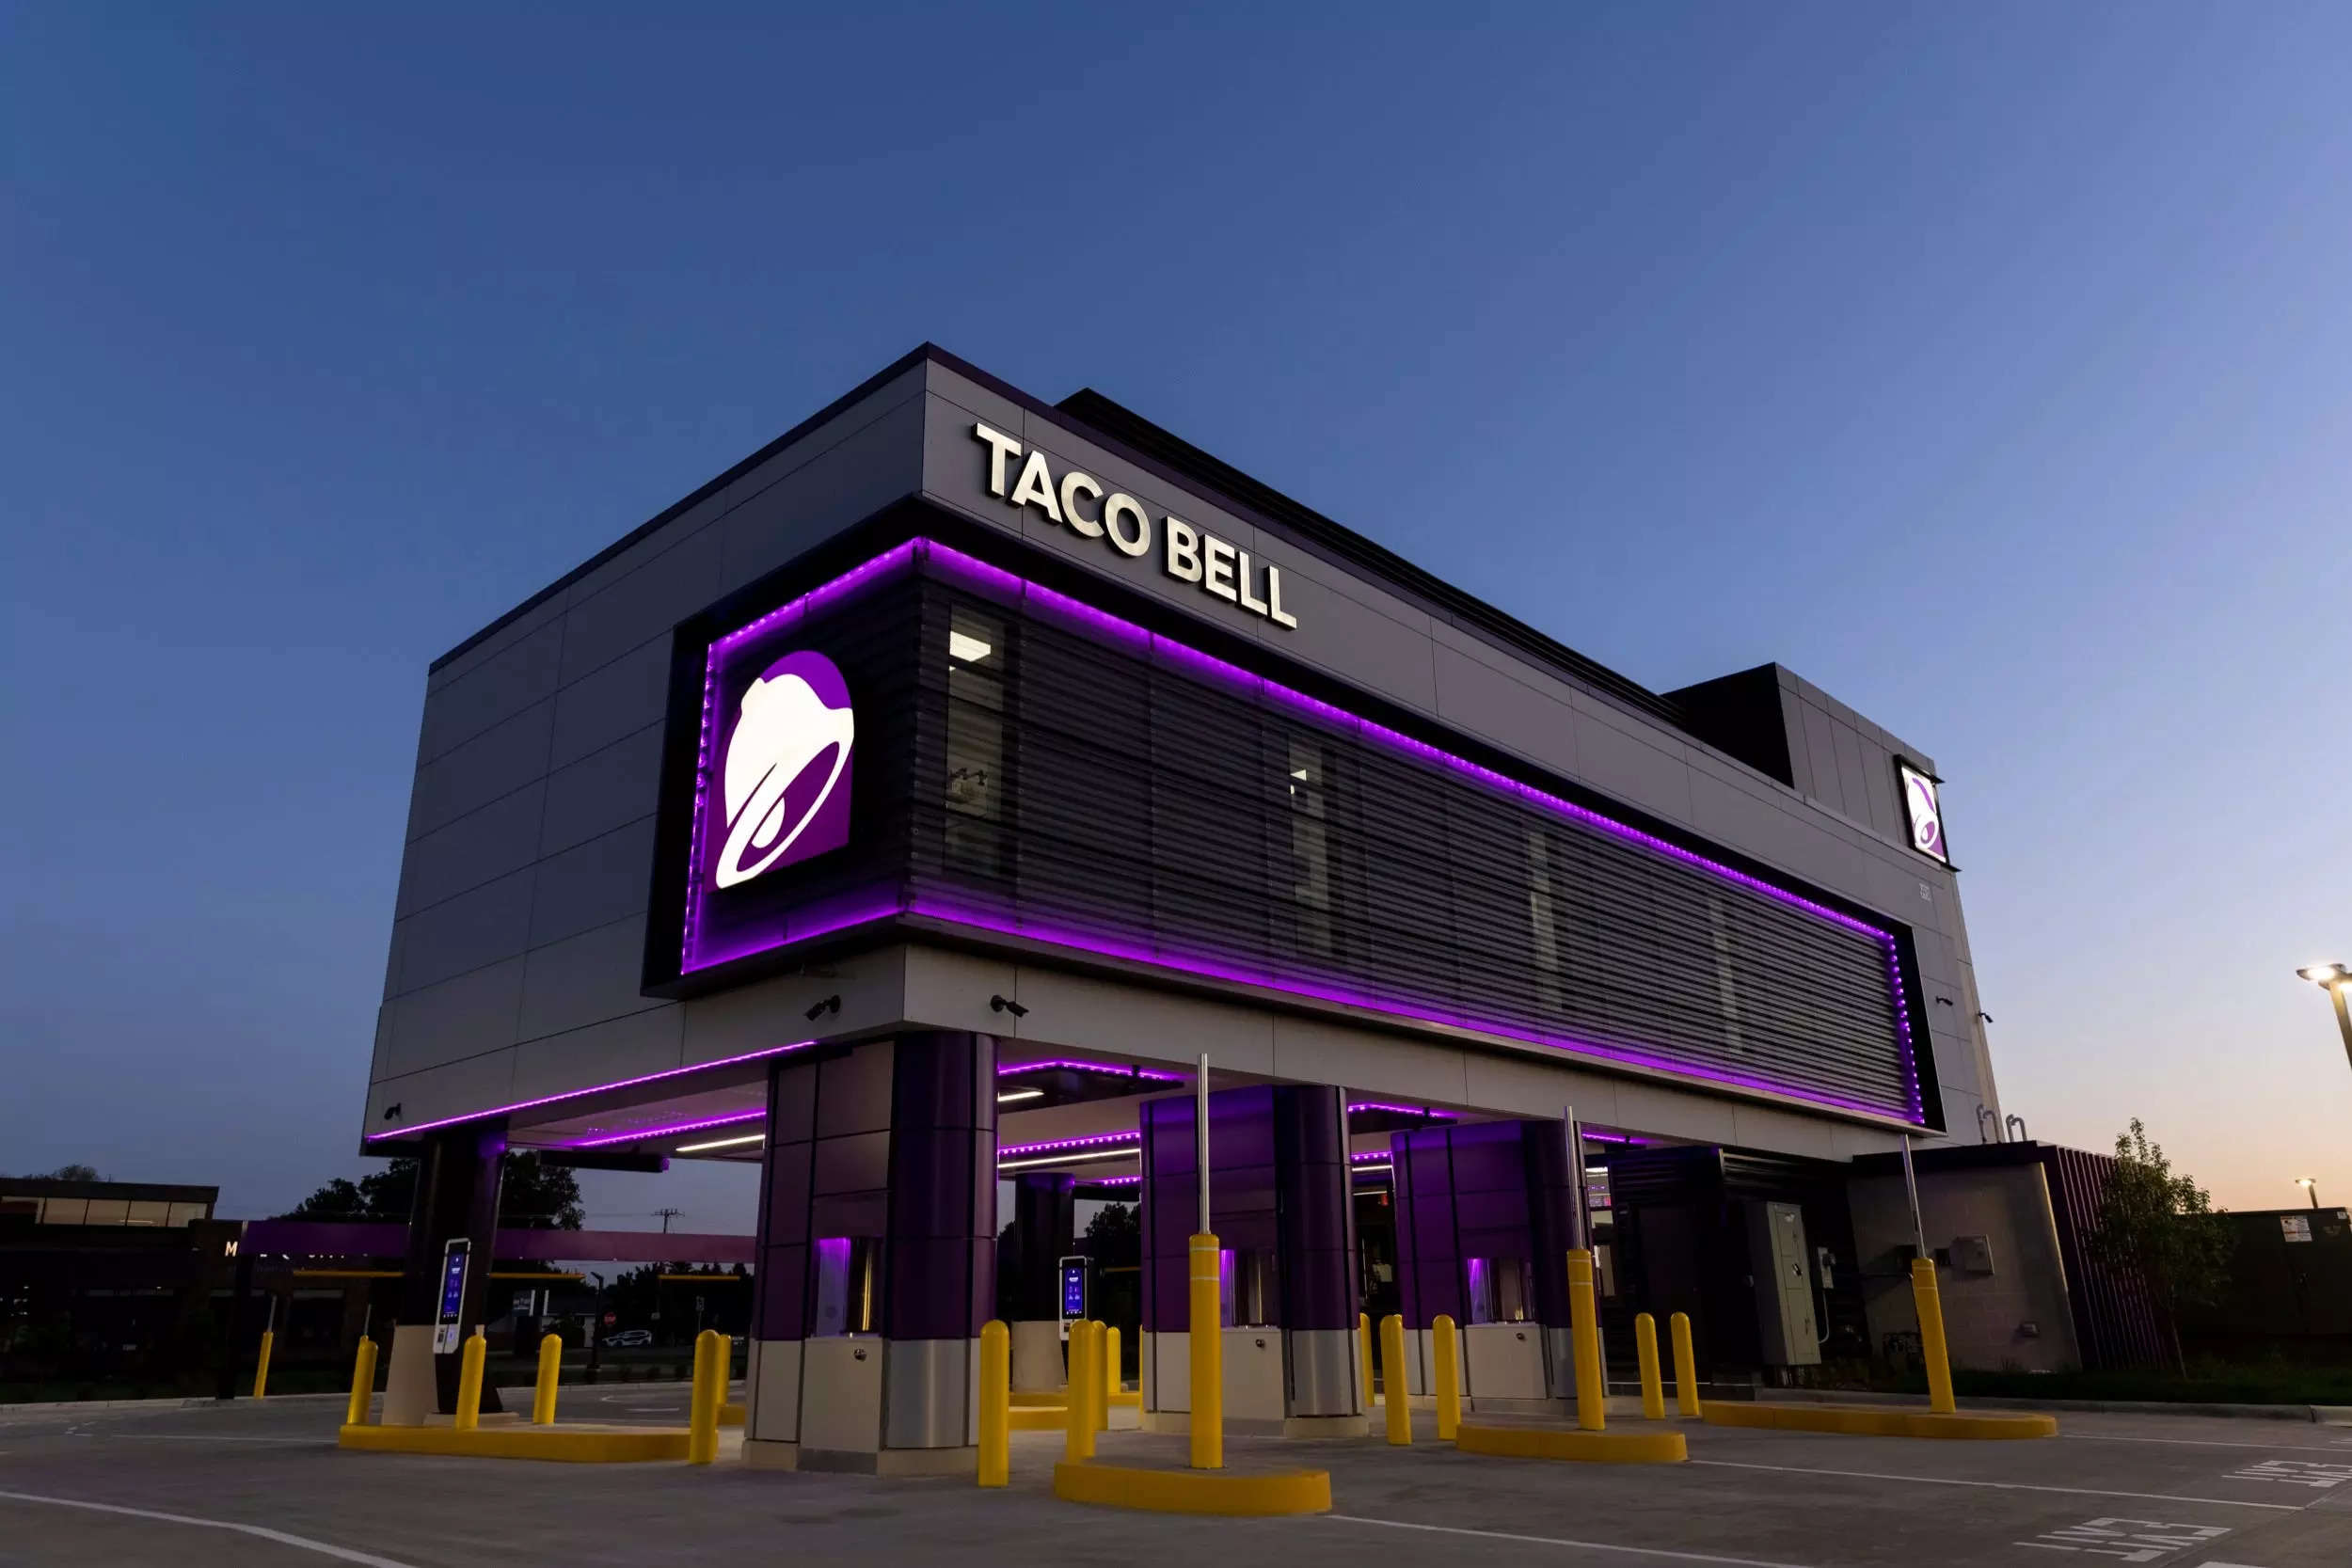 https://www.businessinsider.in/photo/104116137/taco-bell-has-the-fastest-drive-thru-and-its-latest-tech-could-get-customers-their-orders-even-faster.jpg?imgsize=125374